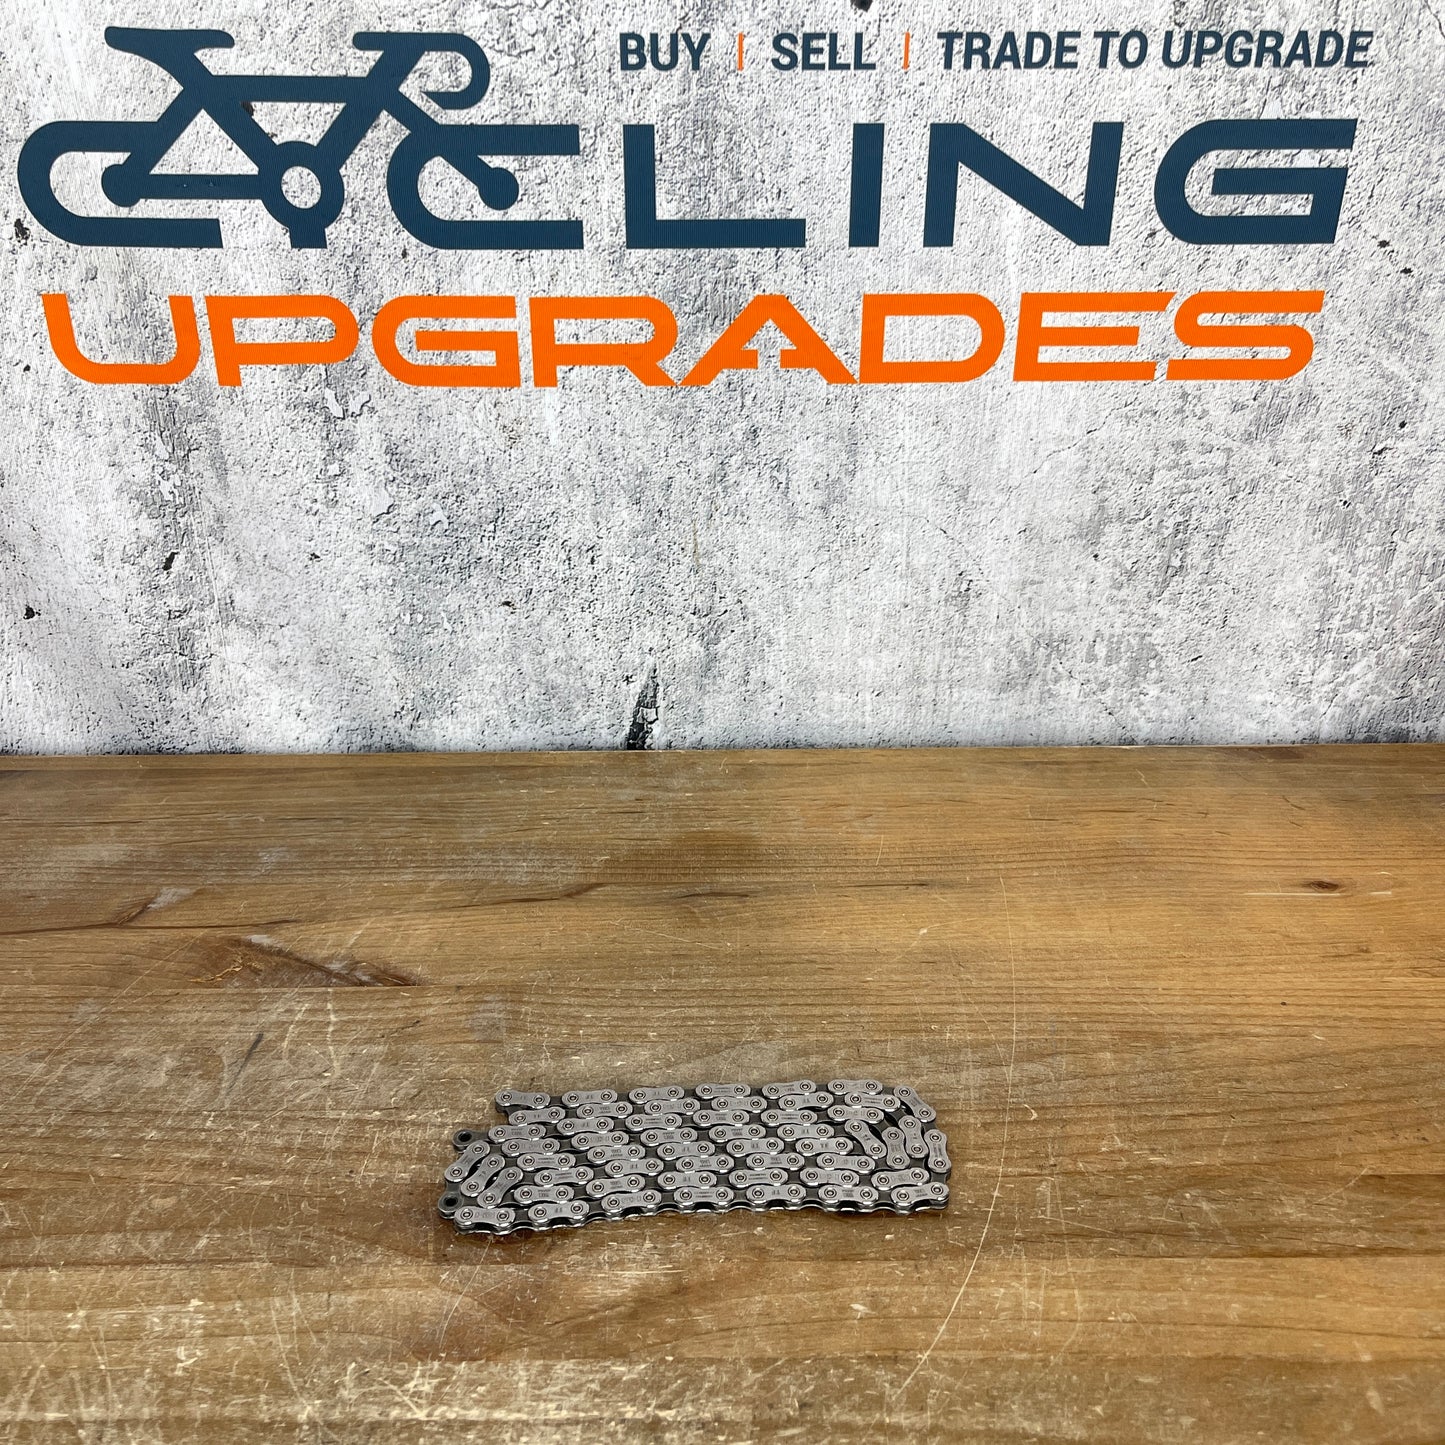 Shimano Deore XT CN-M8100 109 Links 12-Speed Cycling Chain with Quick Link